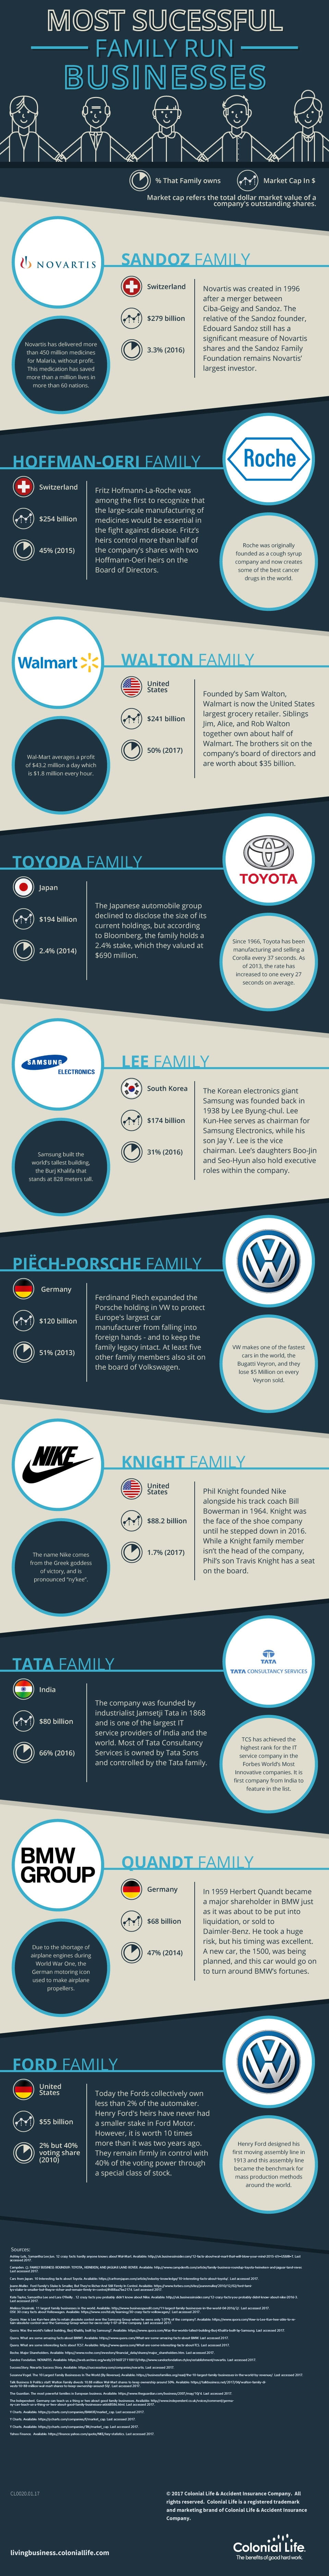 Infographic illustrating the success of different family run businesses